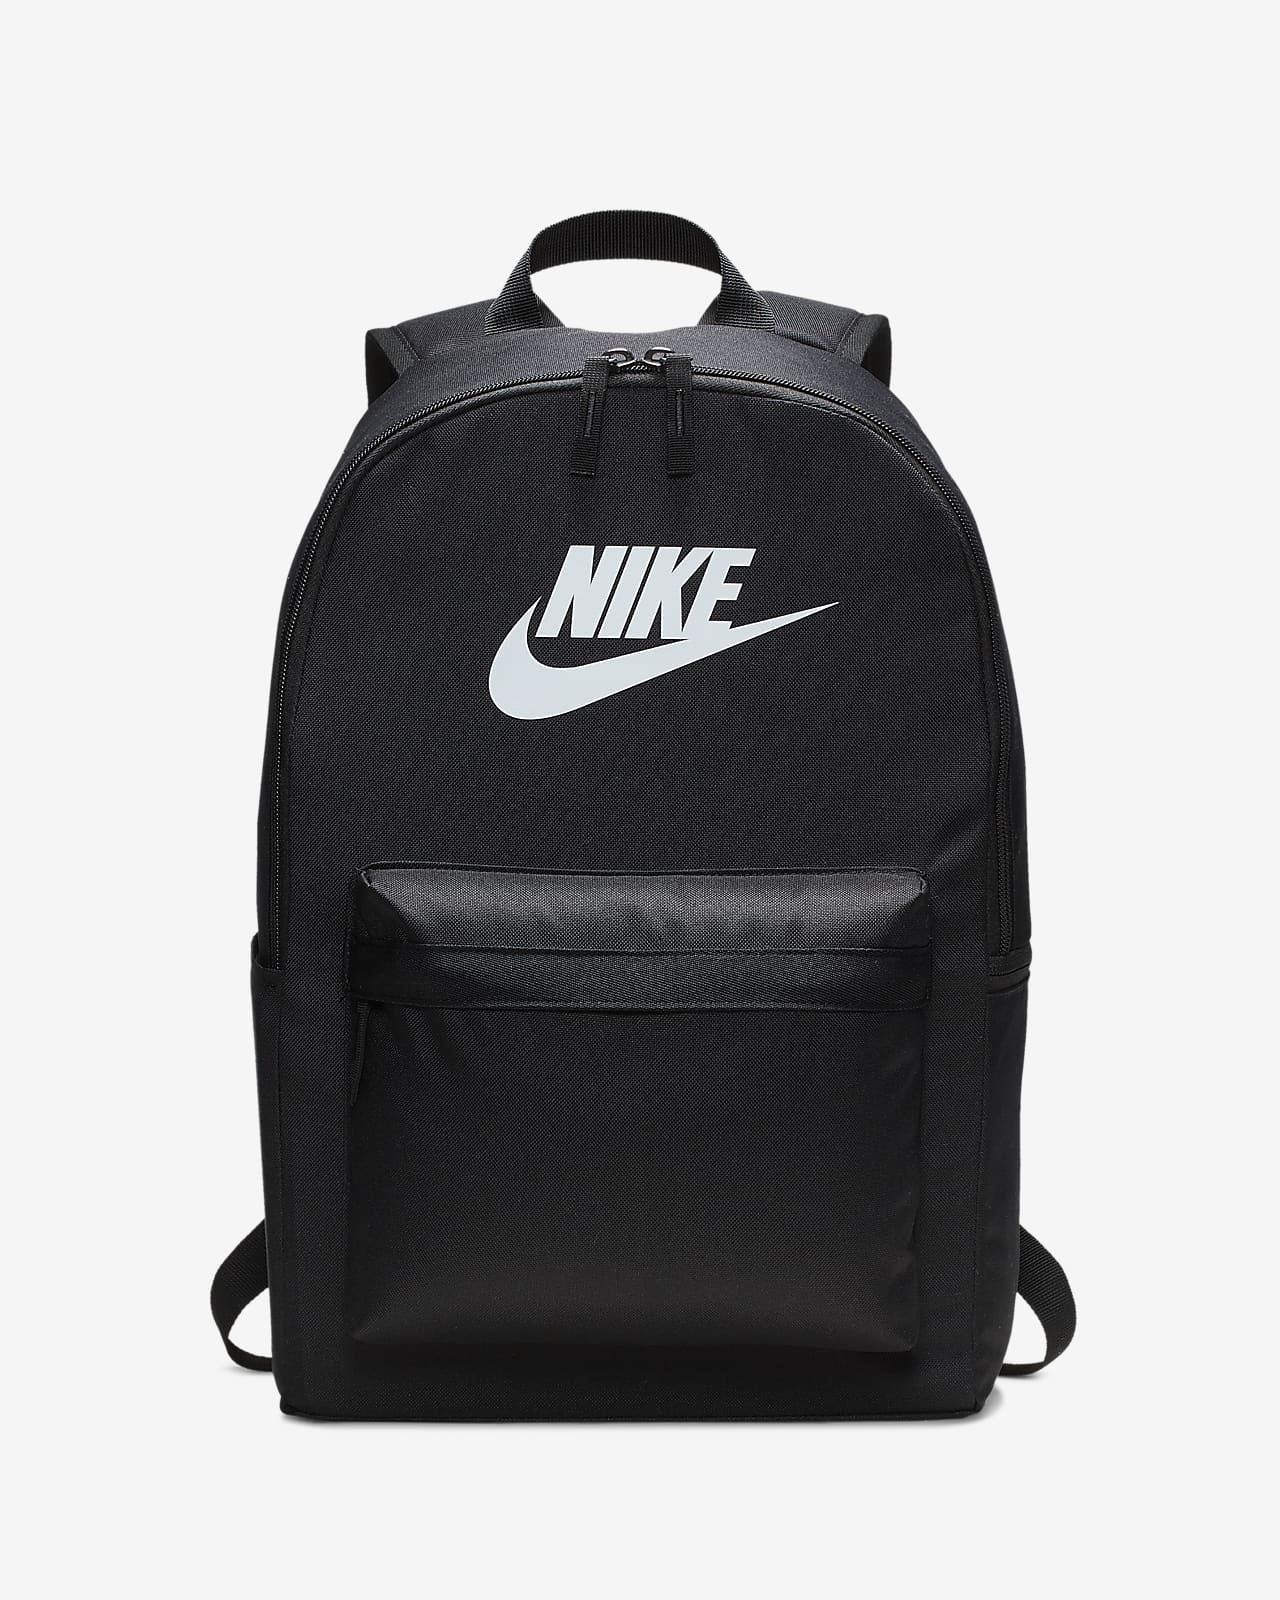 Nike Backpack Army Green - jussie-mylittlefamily